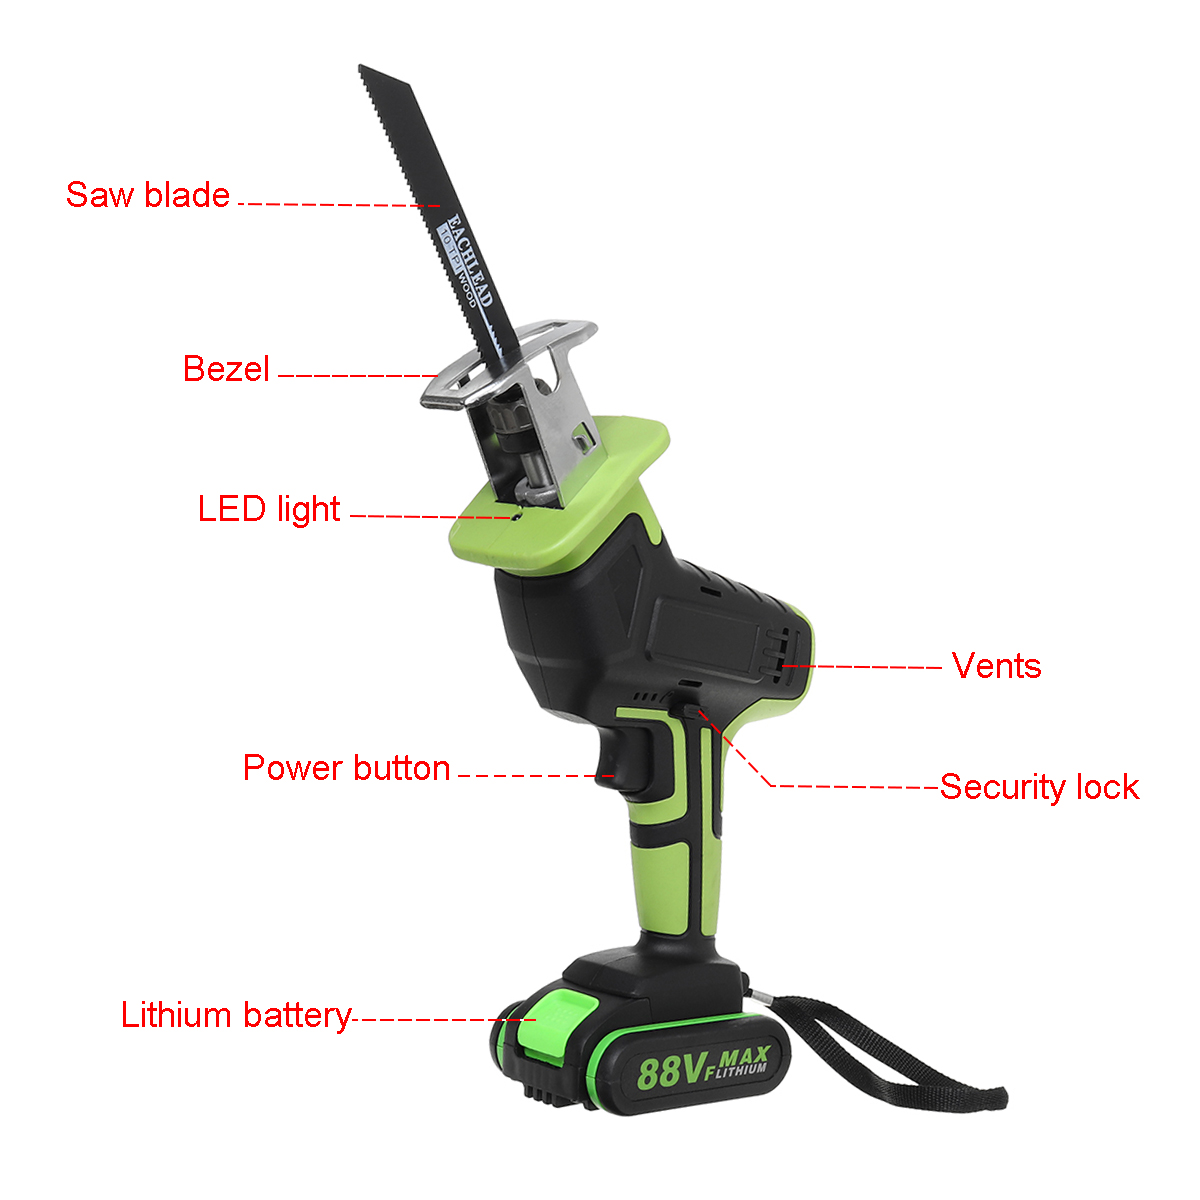 21V-88VF-Electric-Saw-Cordless-Charging-Reciprocating-Saw-Kit-LED-Light-2-Battery-Wood-Cutter-Set-1670502-3